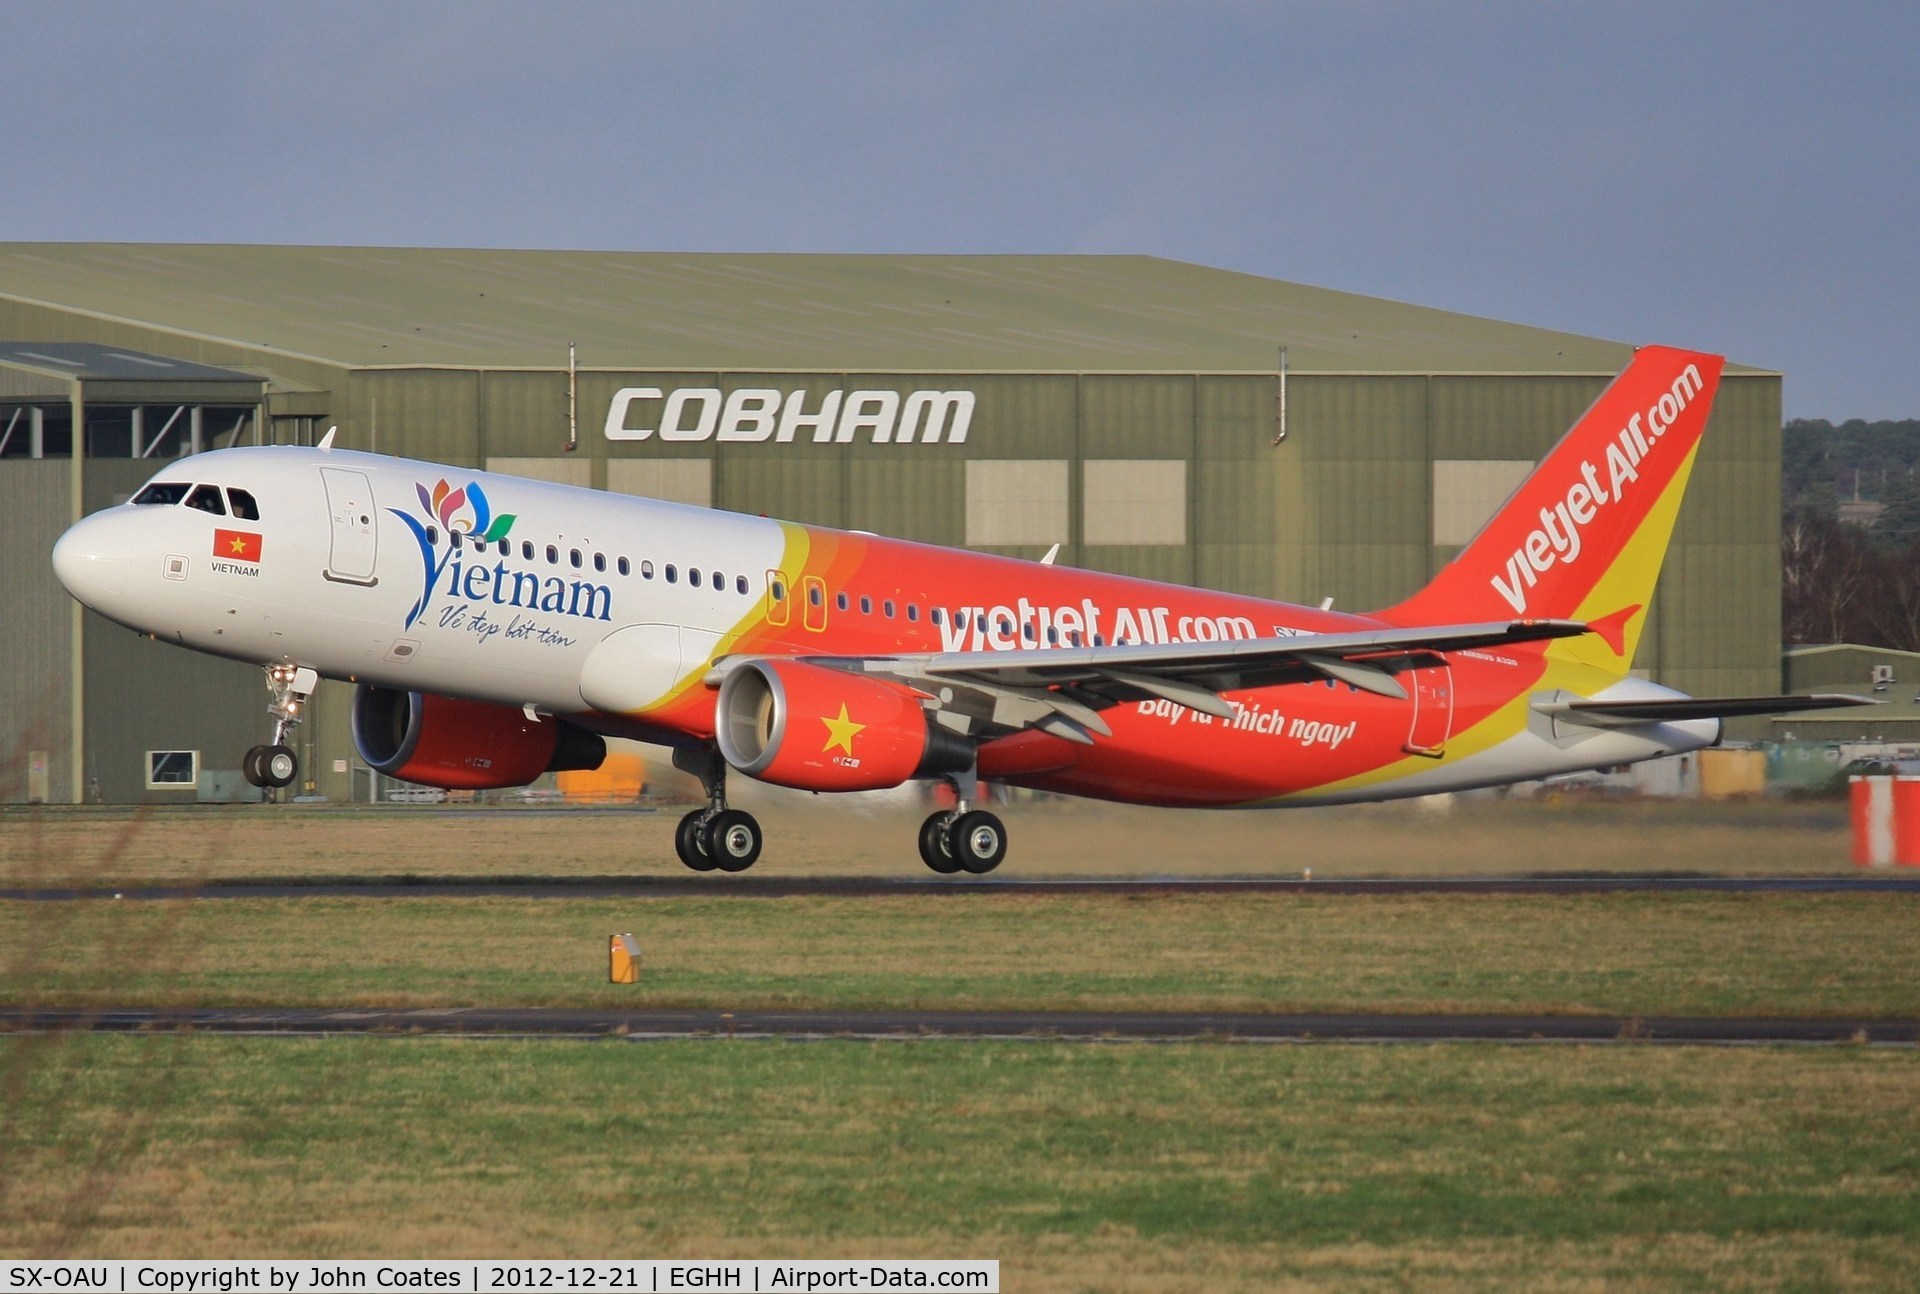 SX-OAU, 2010 Airbus A320-232 C/N 4193, Departing back to Athens prior delivery after respray into VietJet Air colours.